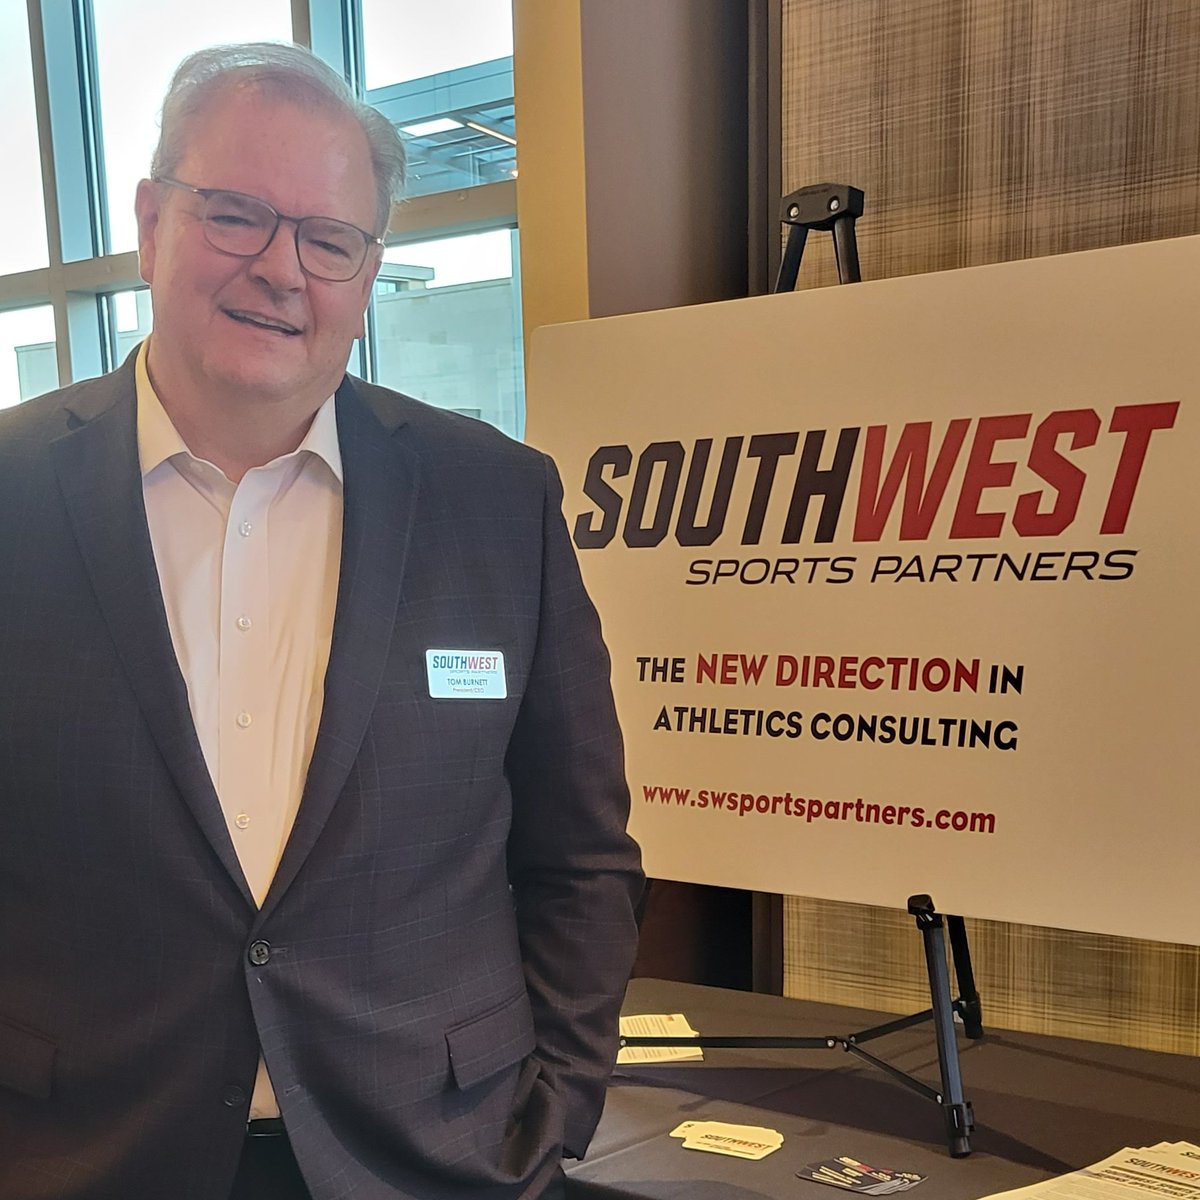 Congrats to our friend and 2022 NFF Legacy Award recipient Tom Burnett, who recently launched Southwest Sports Partners! @SWSPartners is an athletics consulting and events services group based in Frisco, TX. Bravo, Tom! 👏👏👏